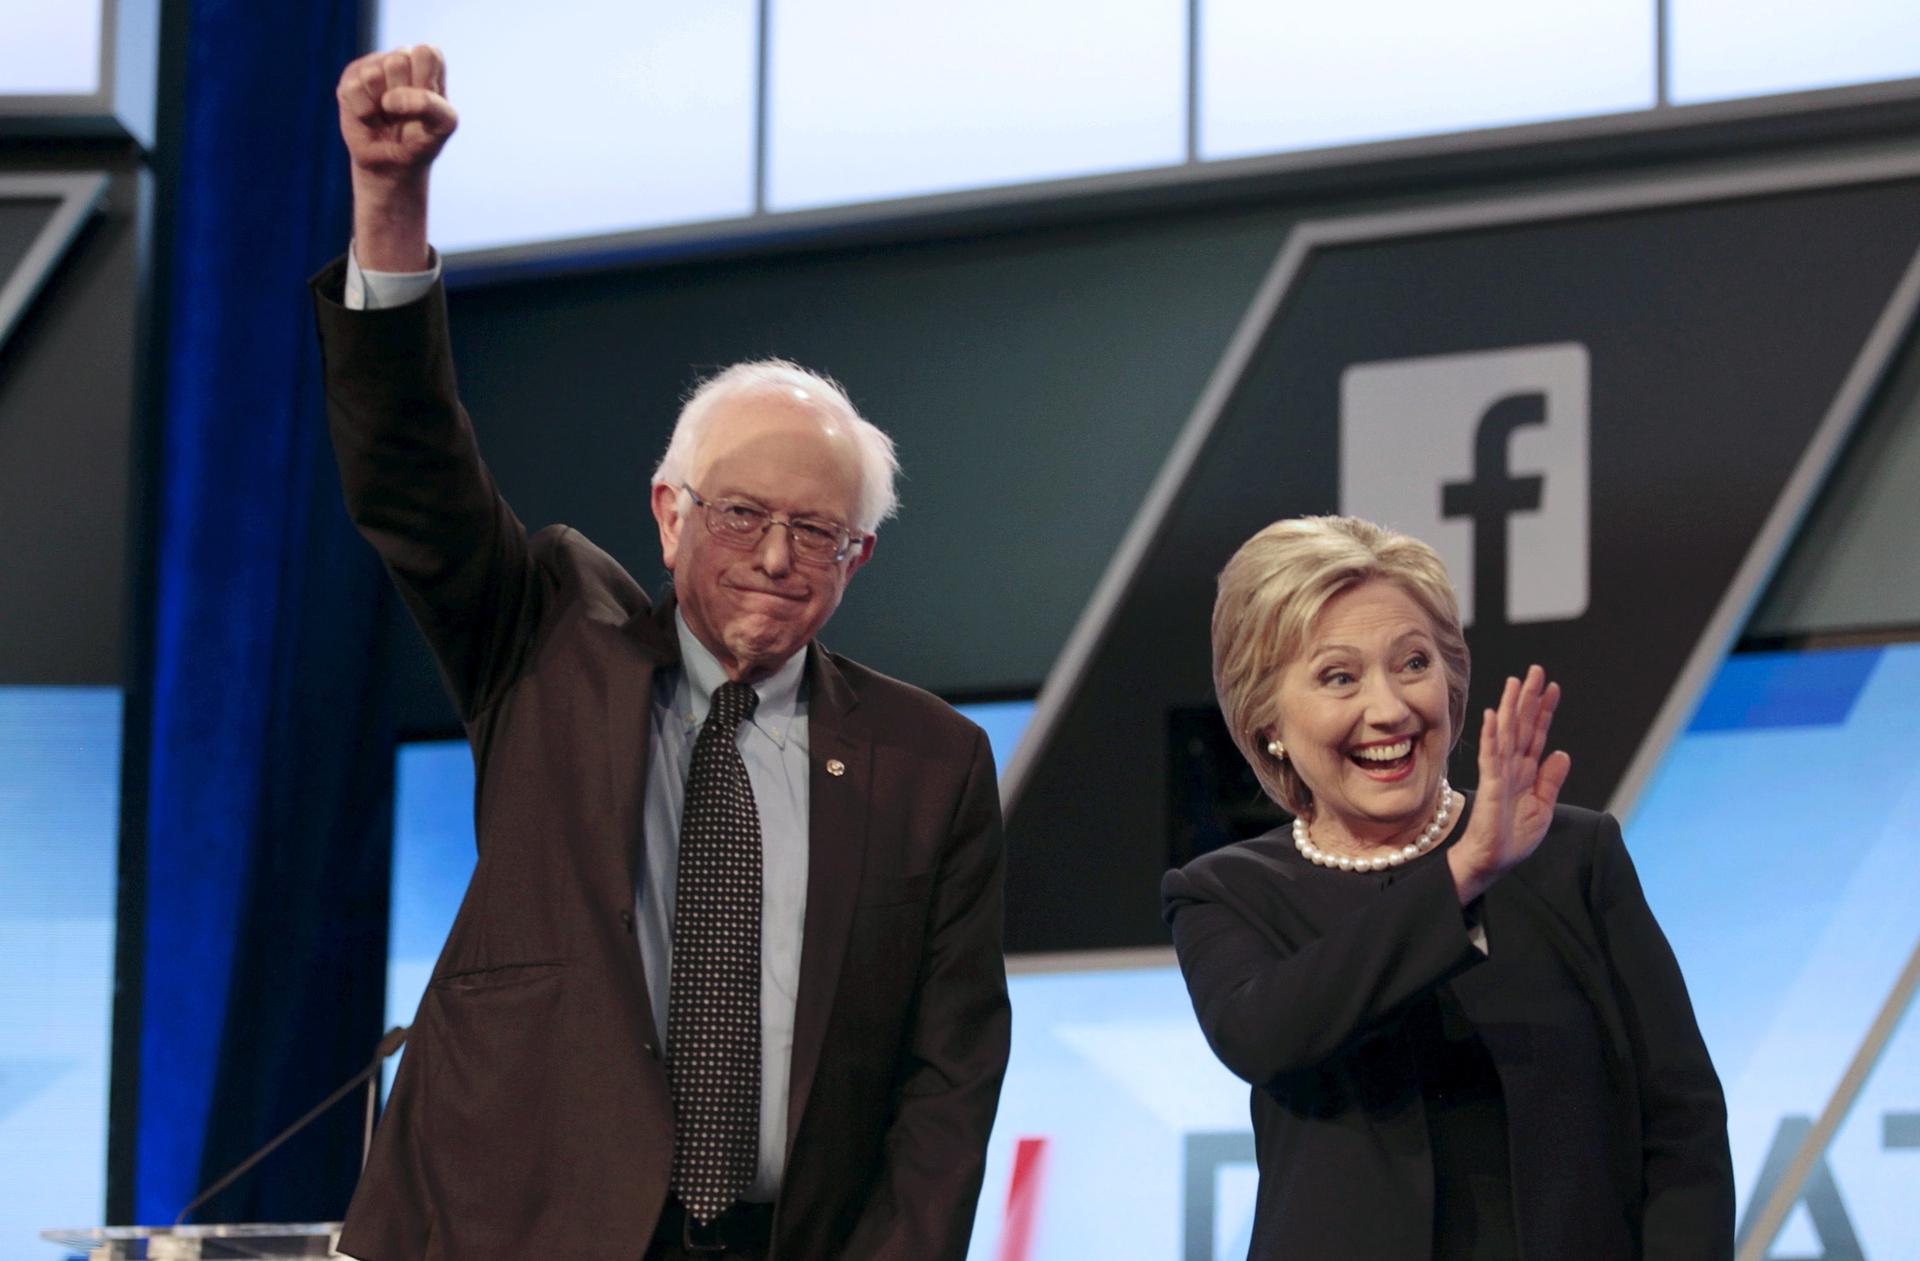 Democratic presidential candidates Senator Bernie Sanders and Hillary Clinton wave before the start of the Univision News and Washington Post Democratic debate in Kendall, Florida on March 9, 2016